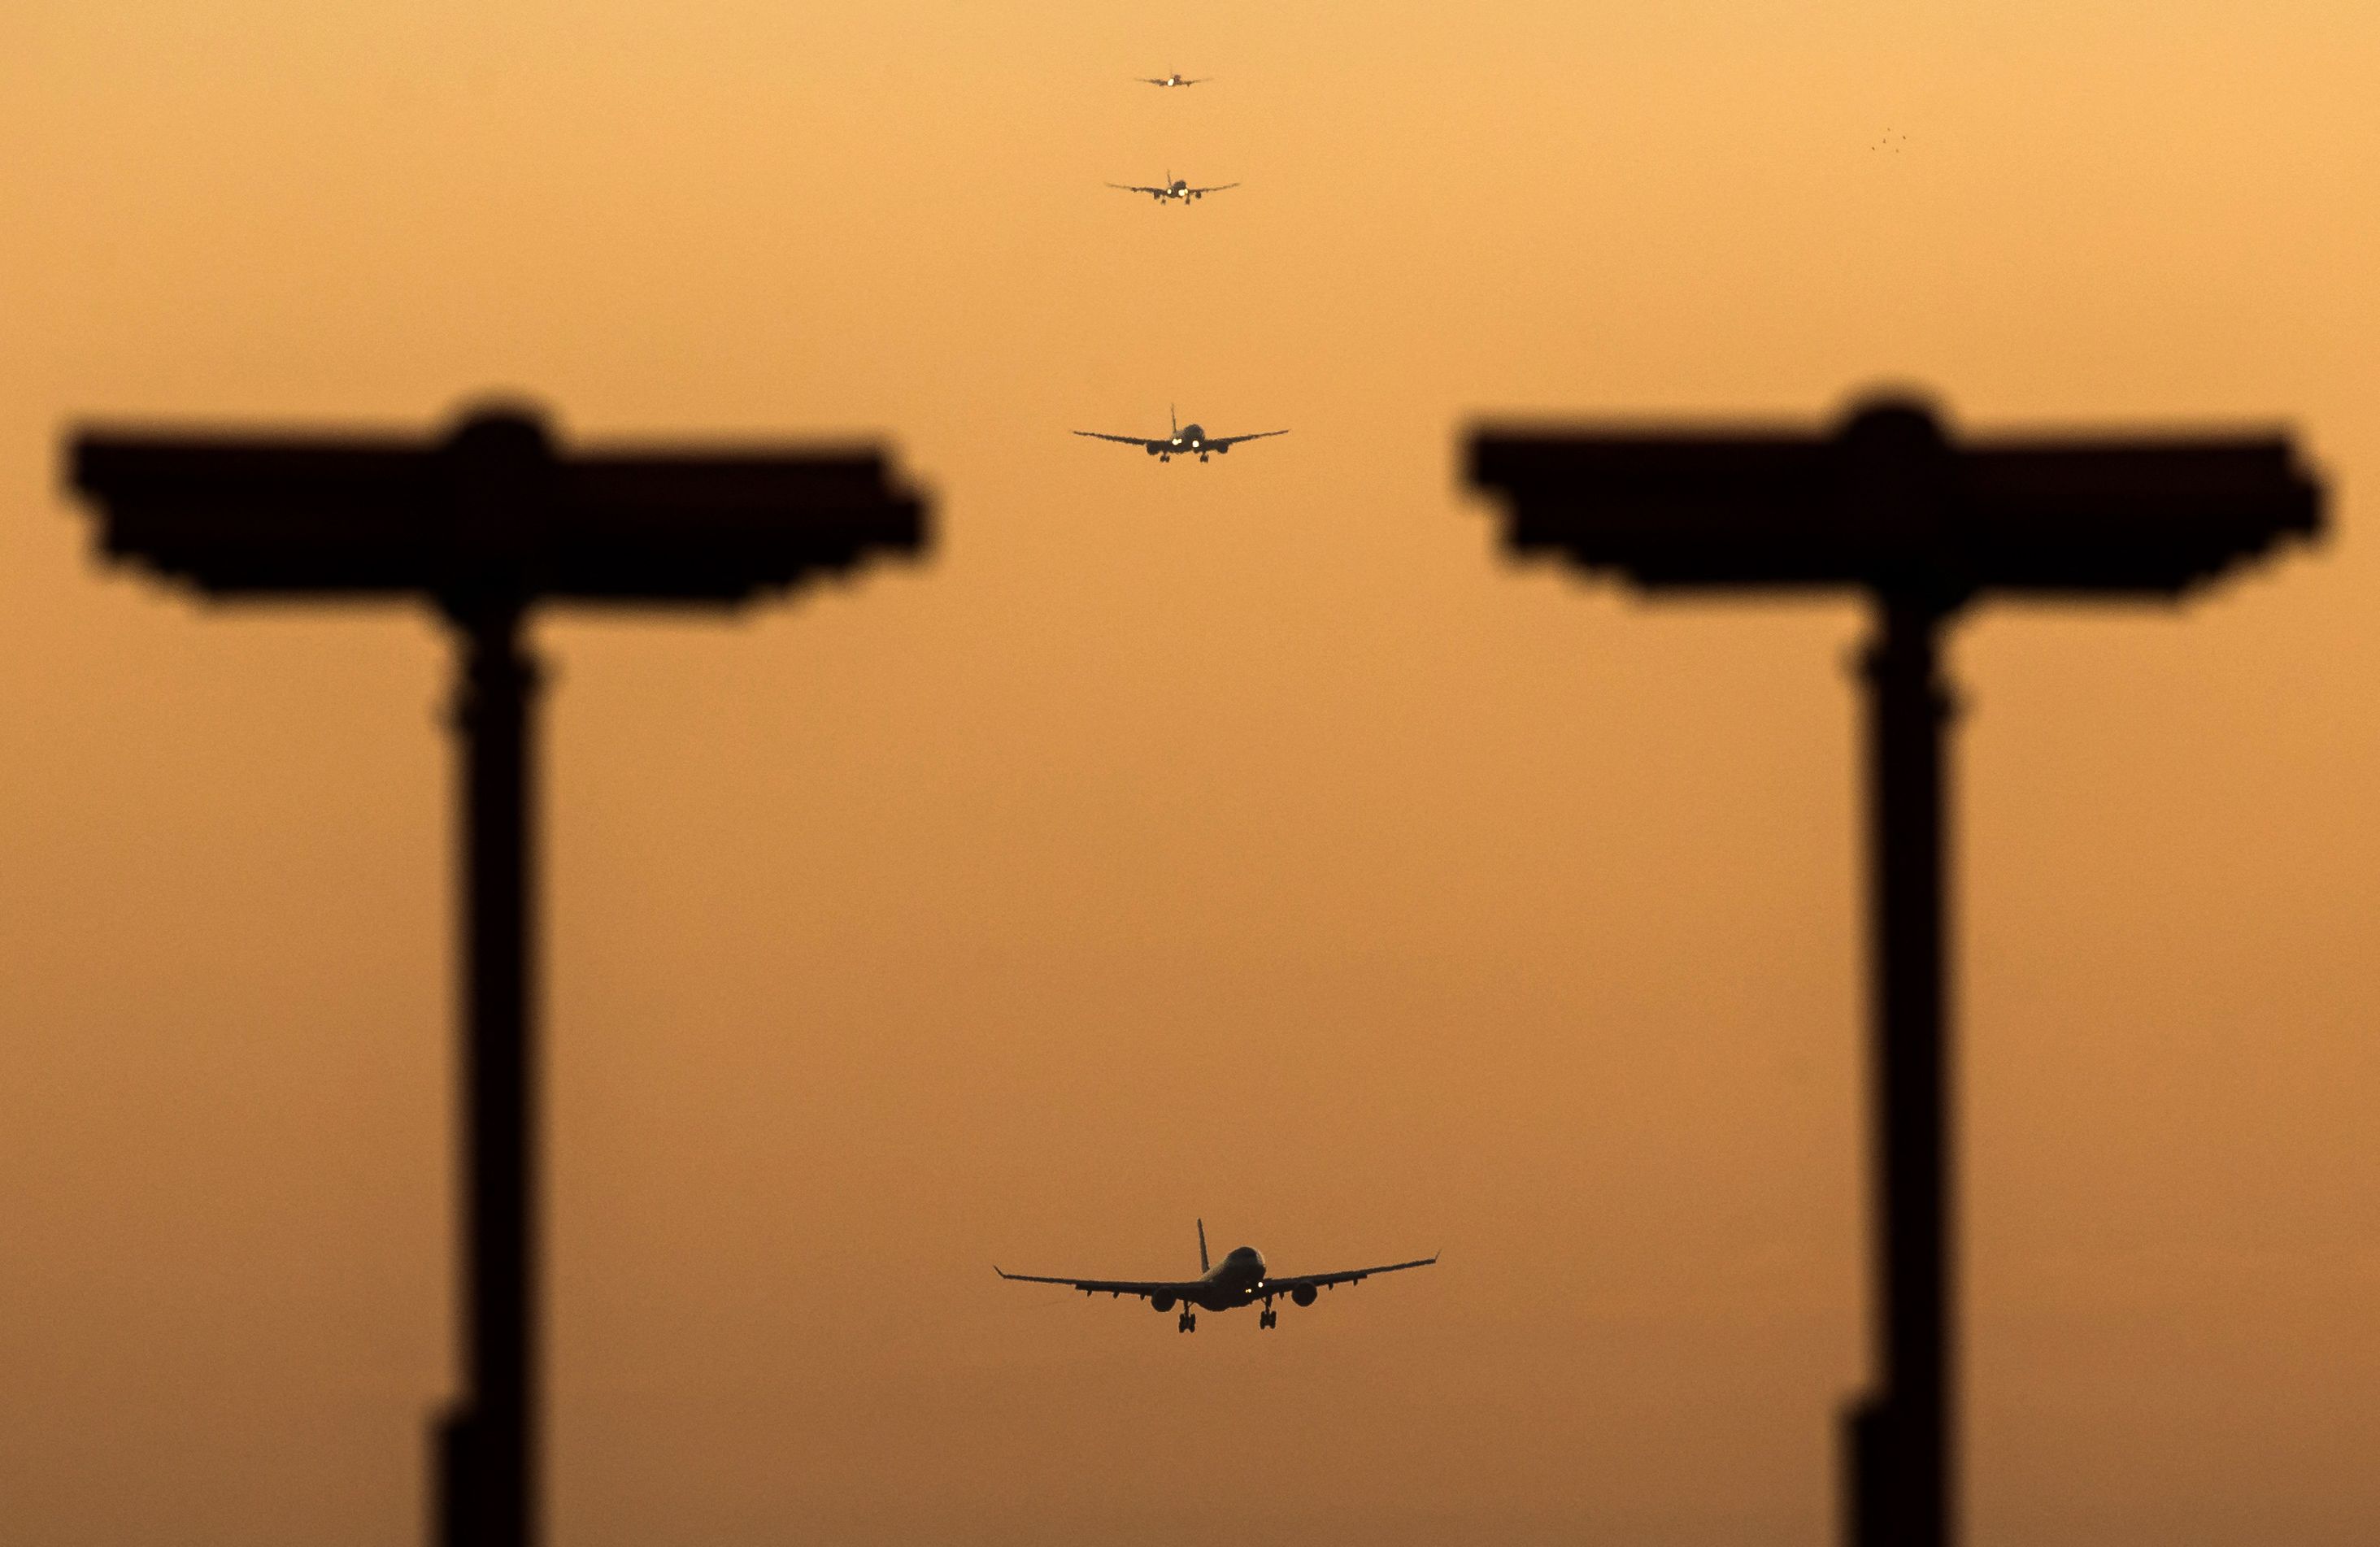 Aircraft lining up in the sky to land at London Heathrow Airport 